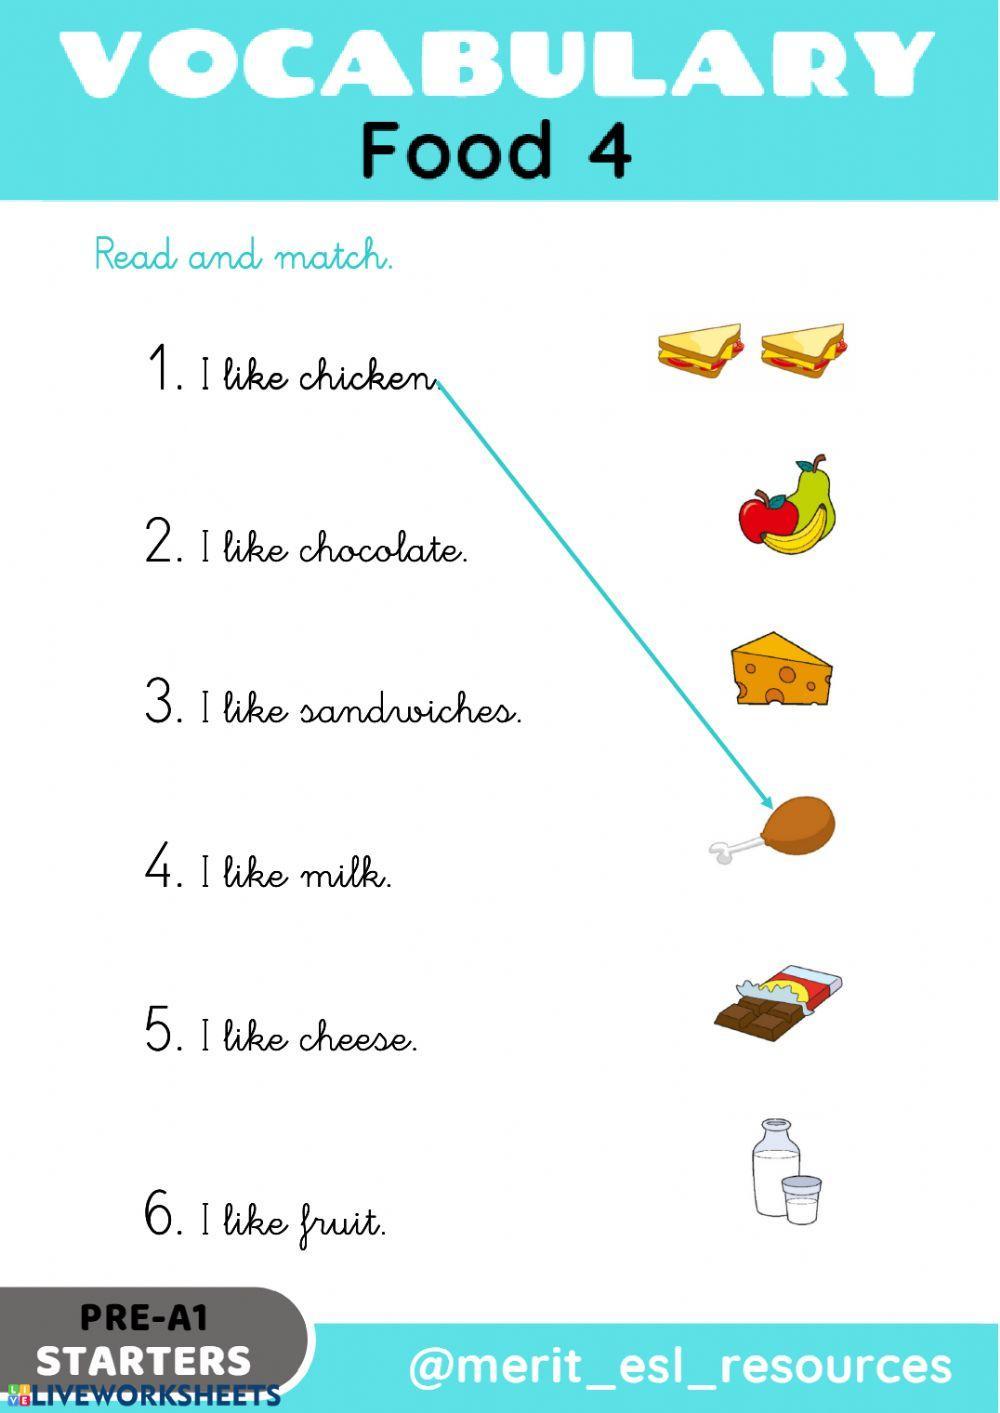 Food - Read and match